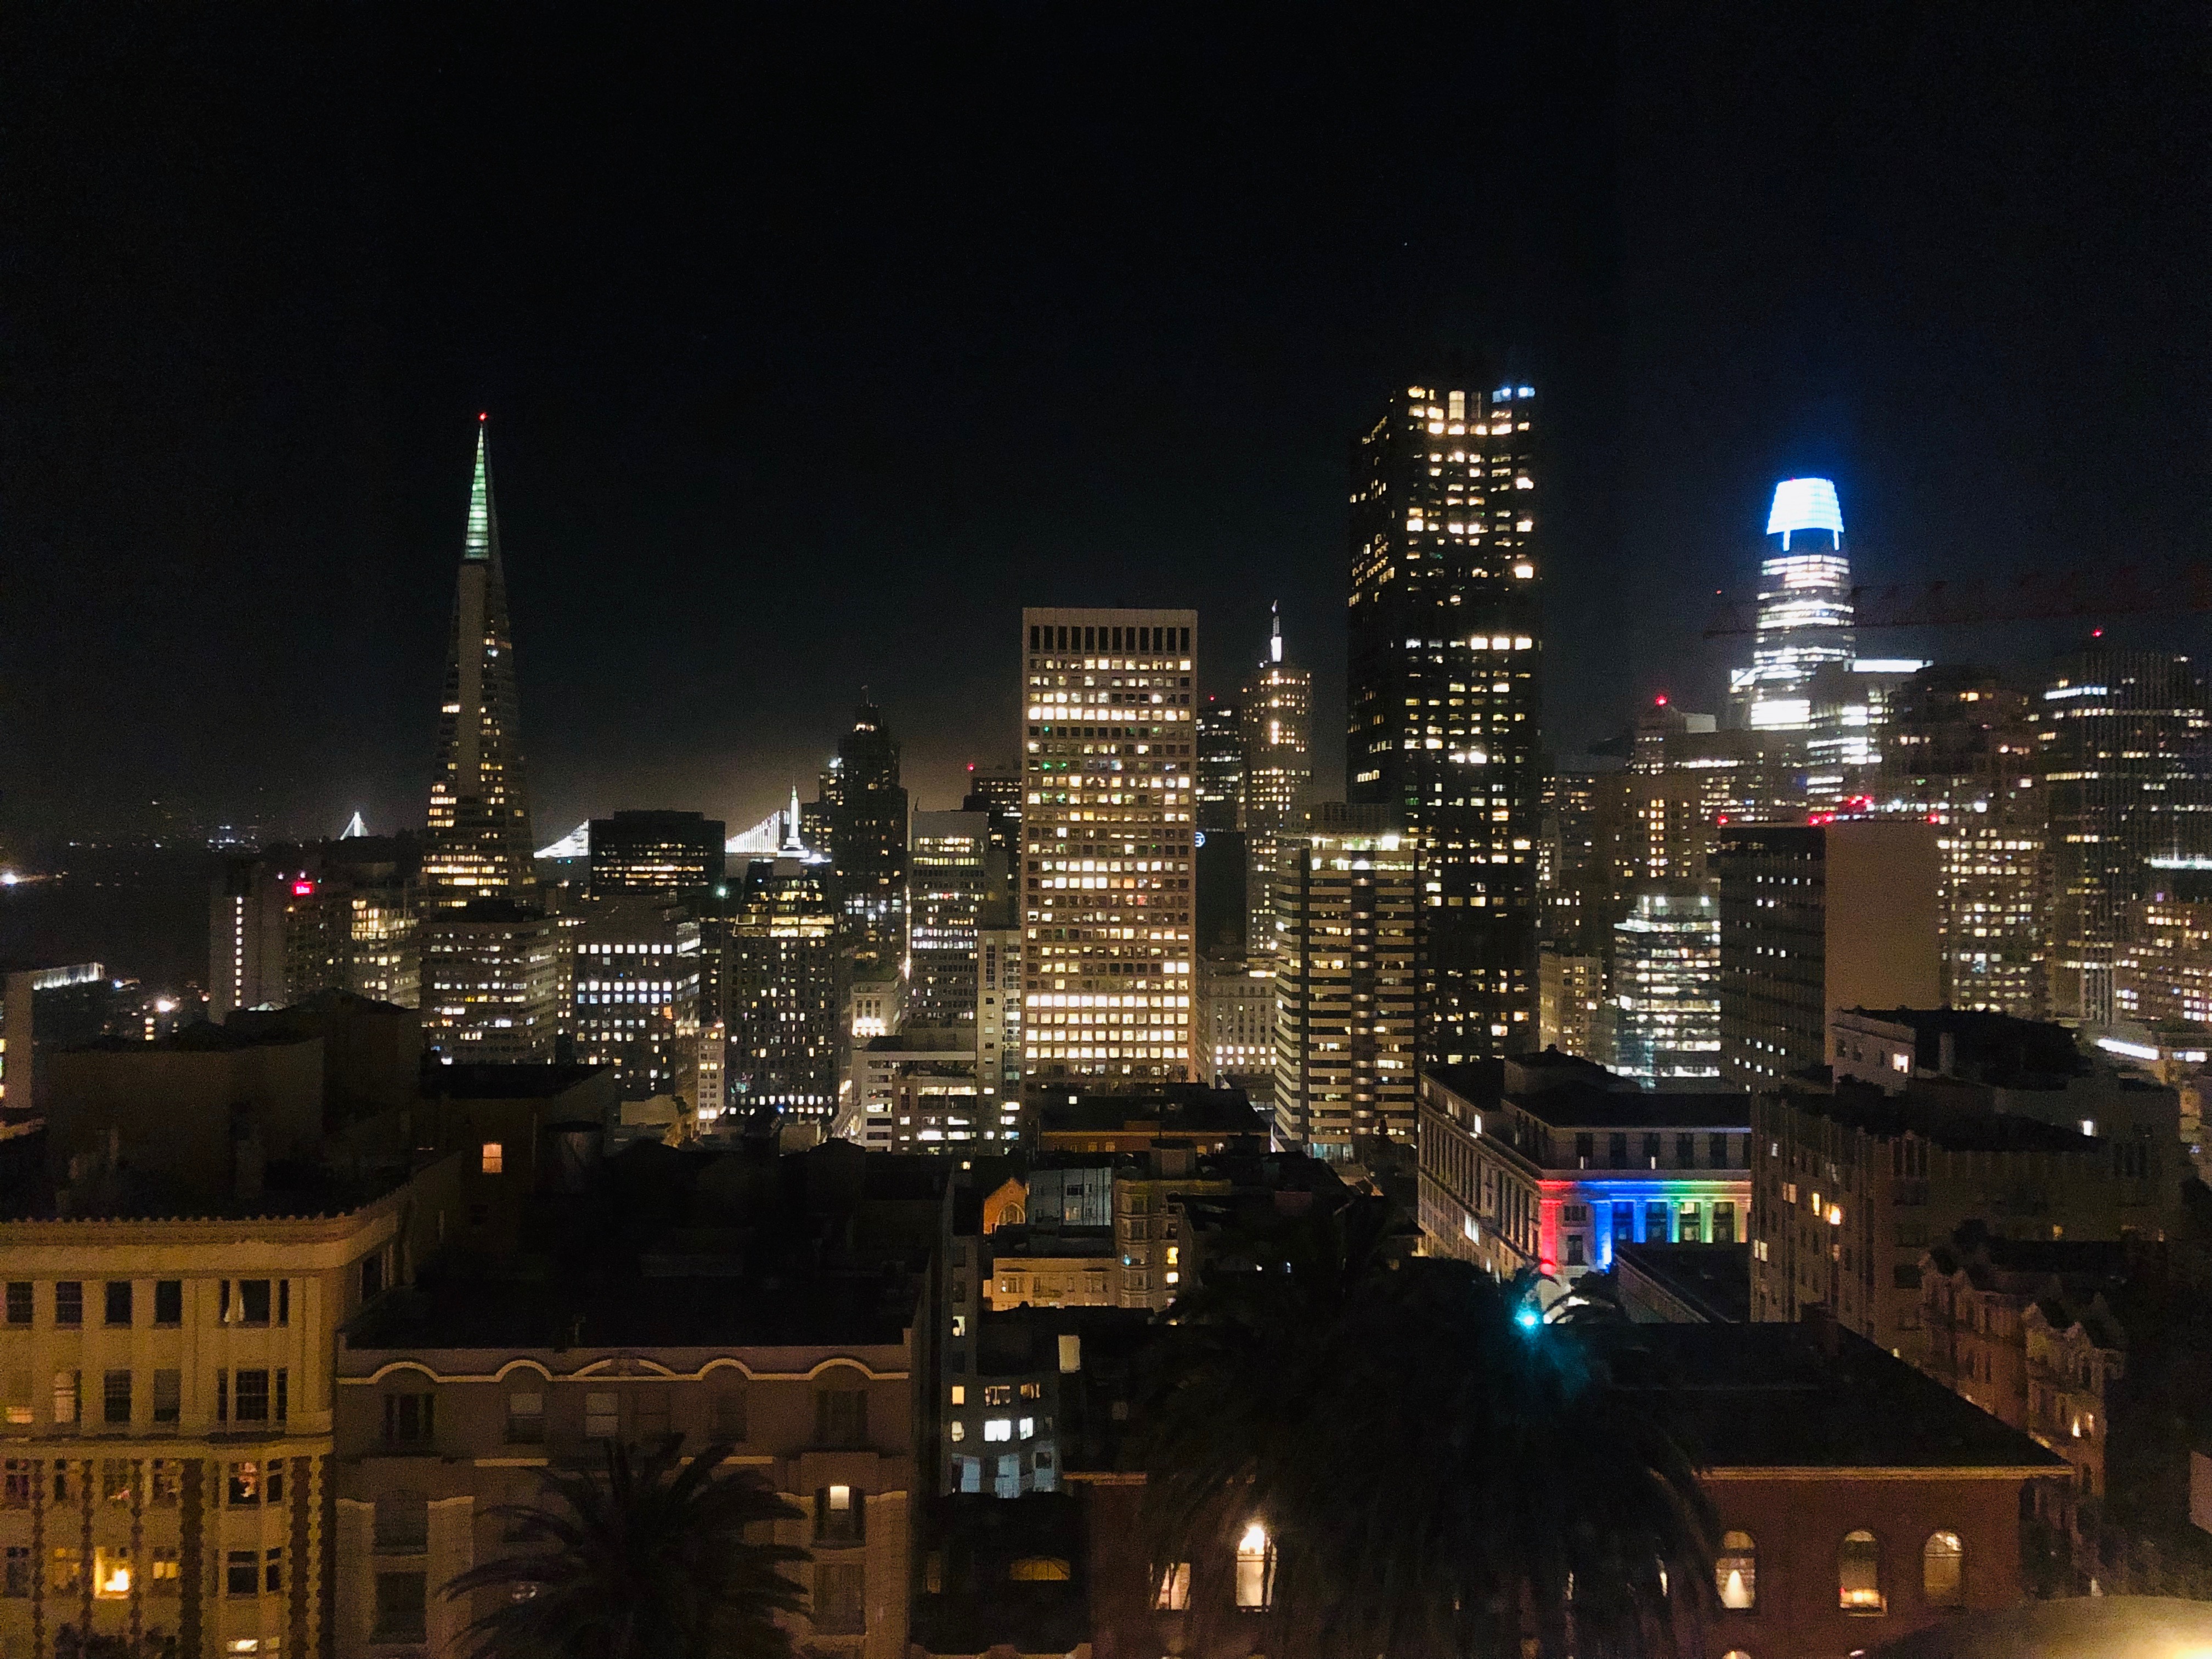 Nighttime view from my room at the Fairmont Hotel in San Francisco_Adrienne Nguyen